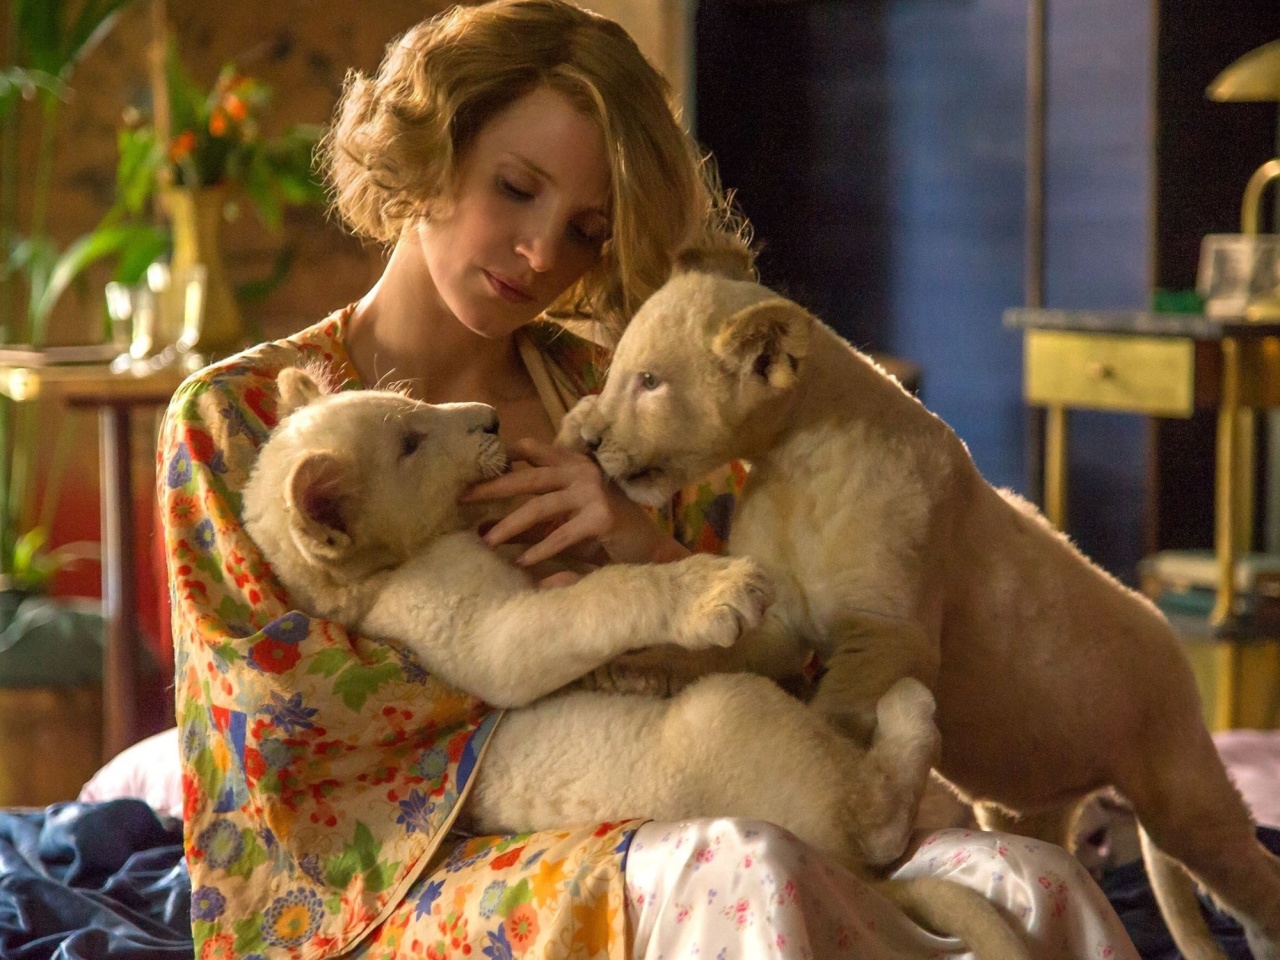 The Zookeepers Wife Film with Jessica Chastain wallpaper 1280x960